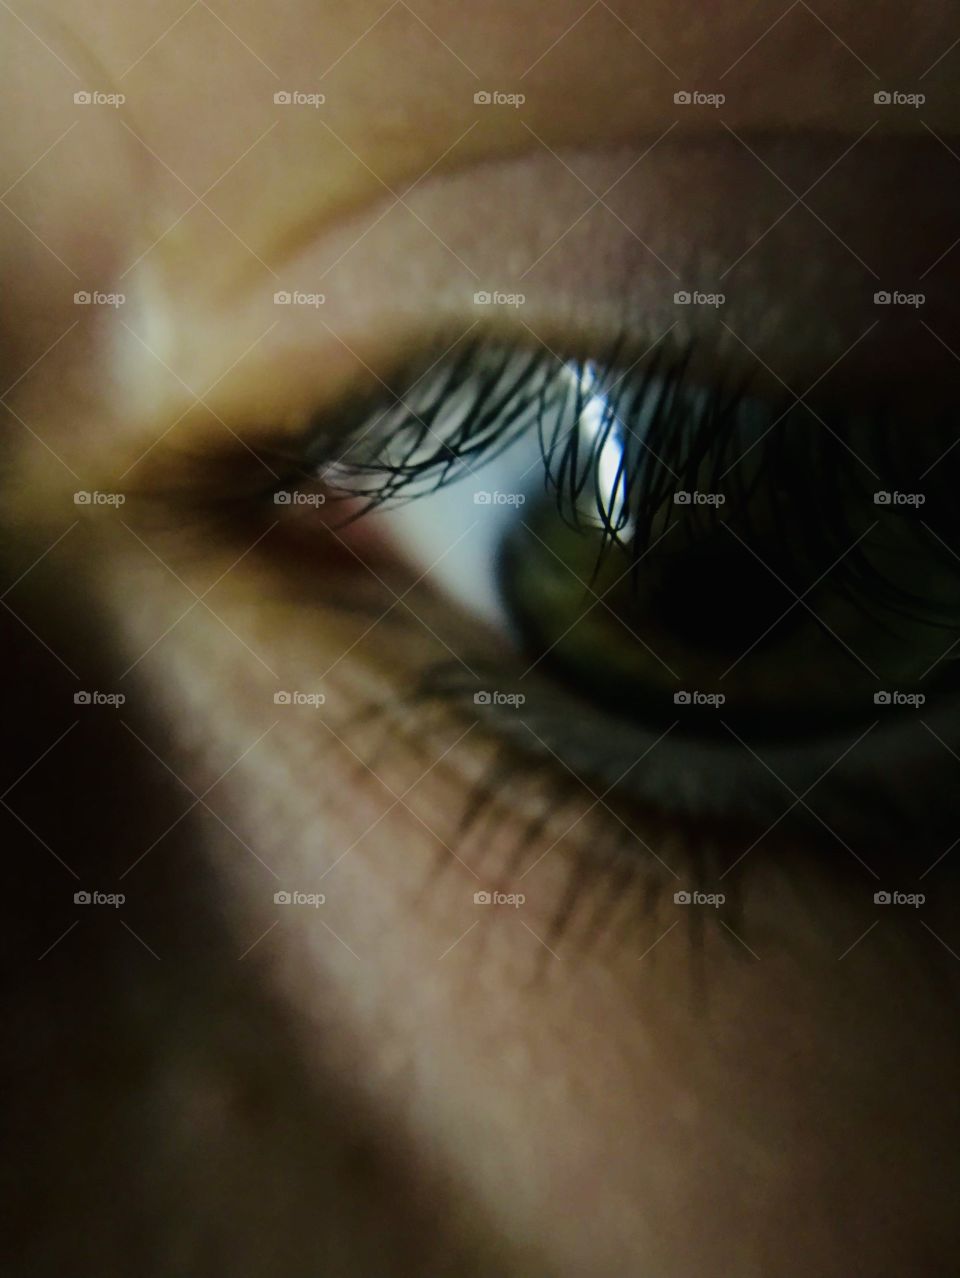 This is the very nice photo shot with a macro lens of My eye and it really brings out the details and the eyelashes